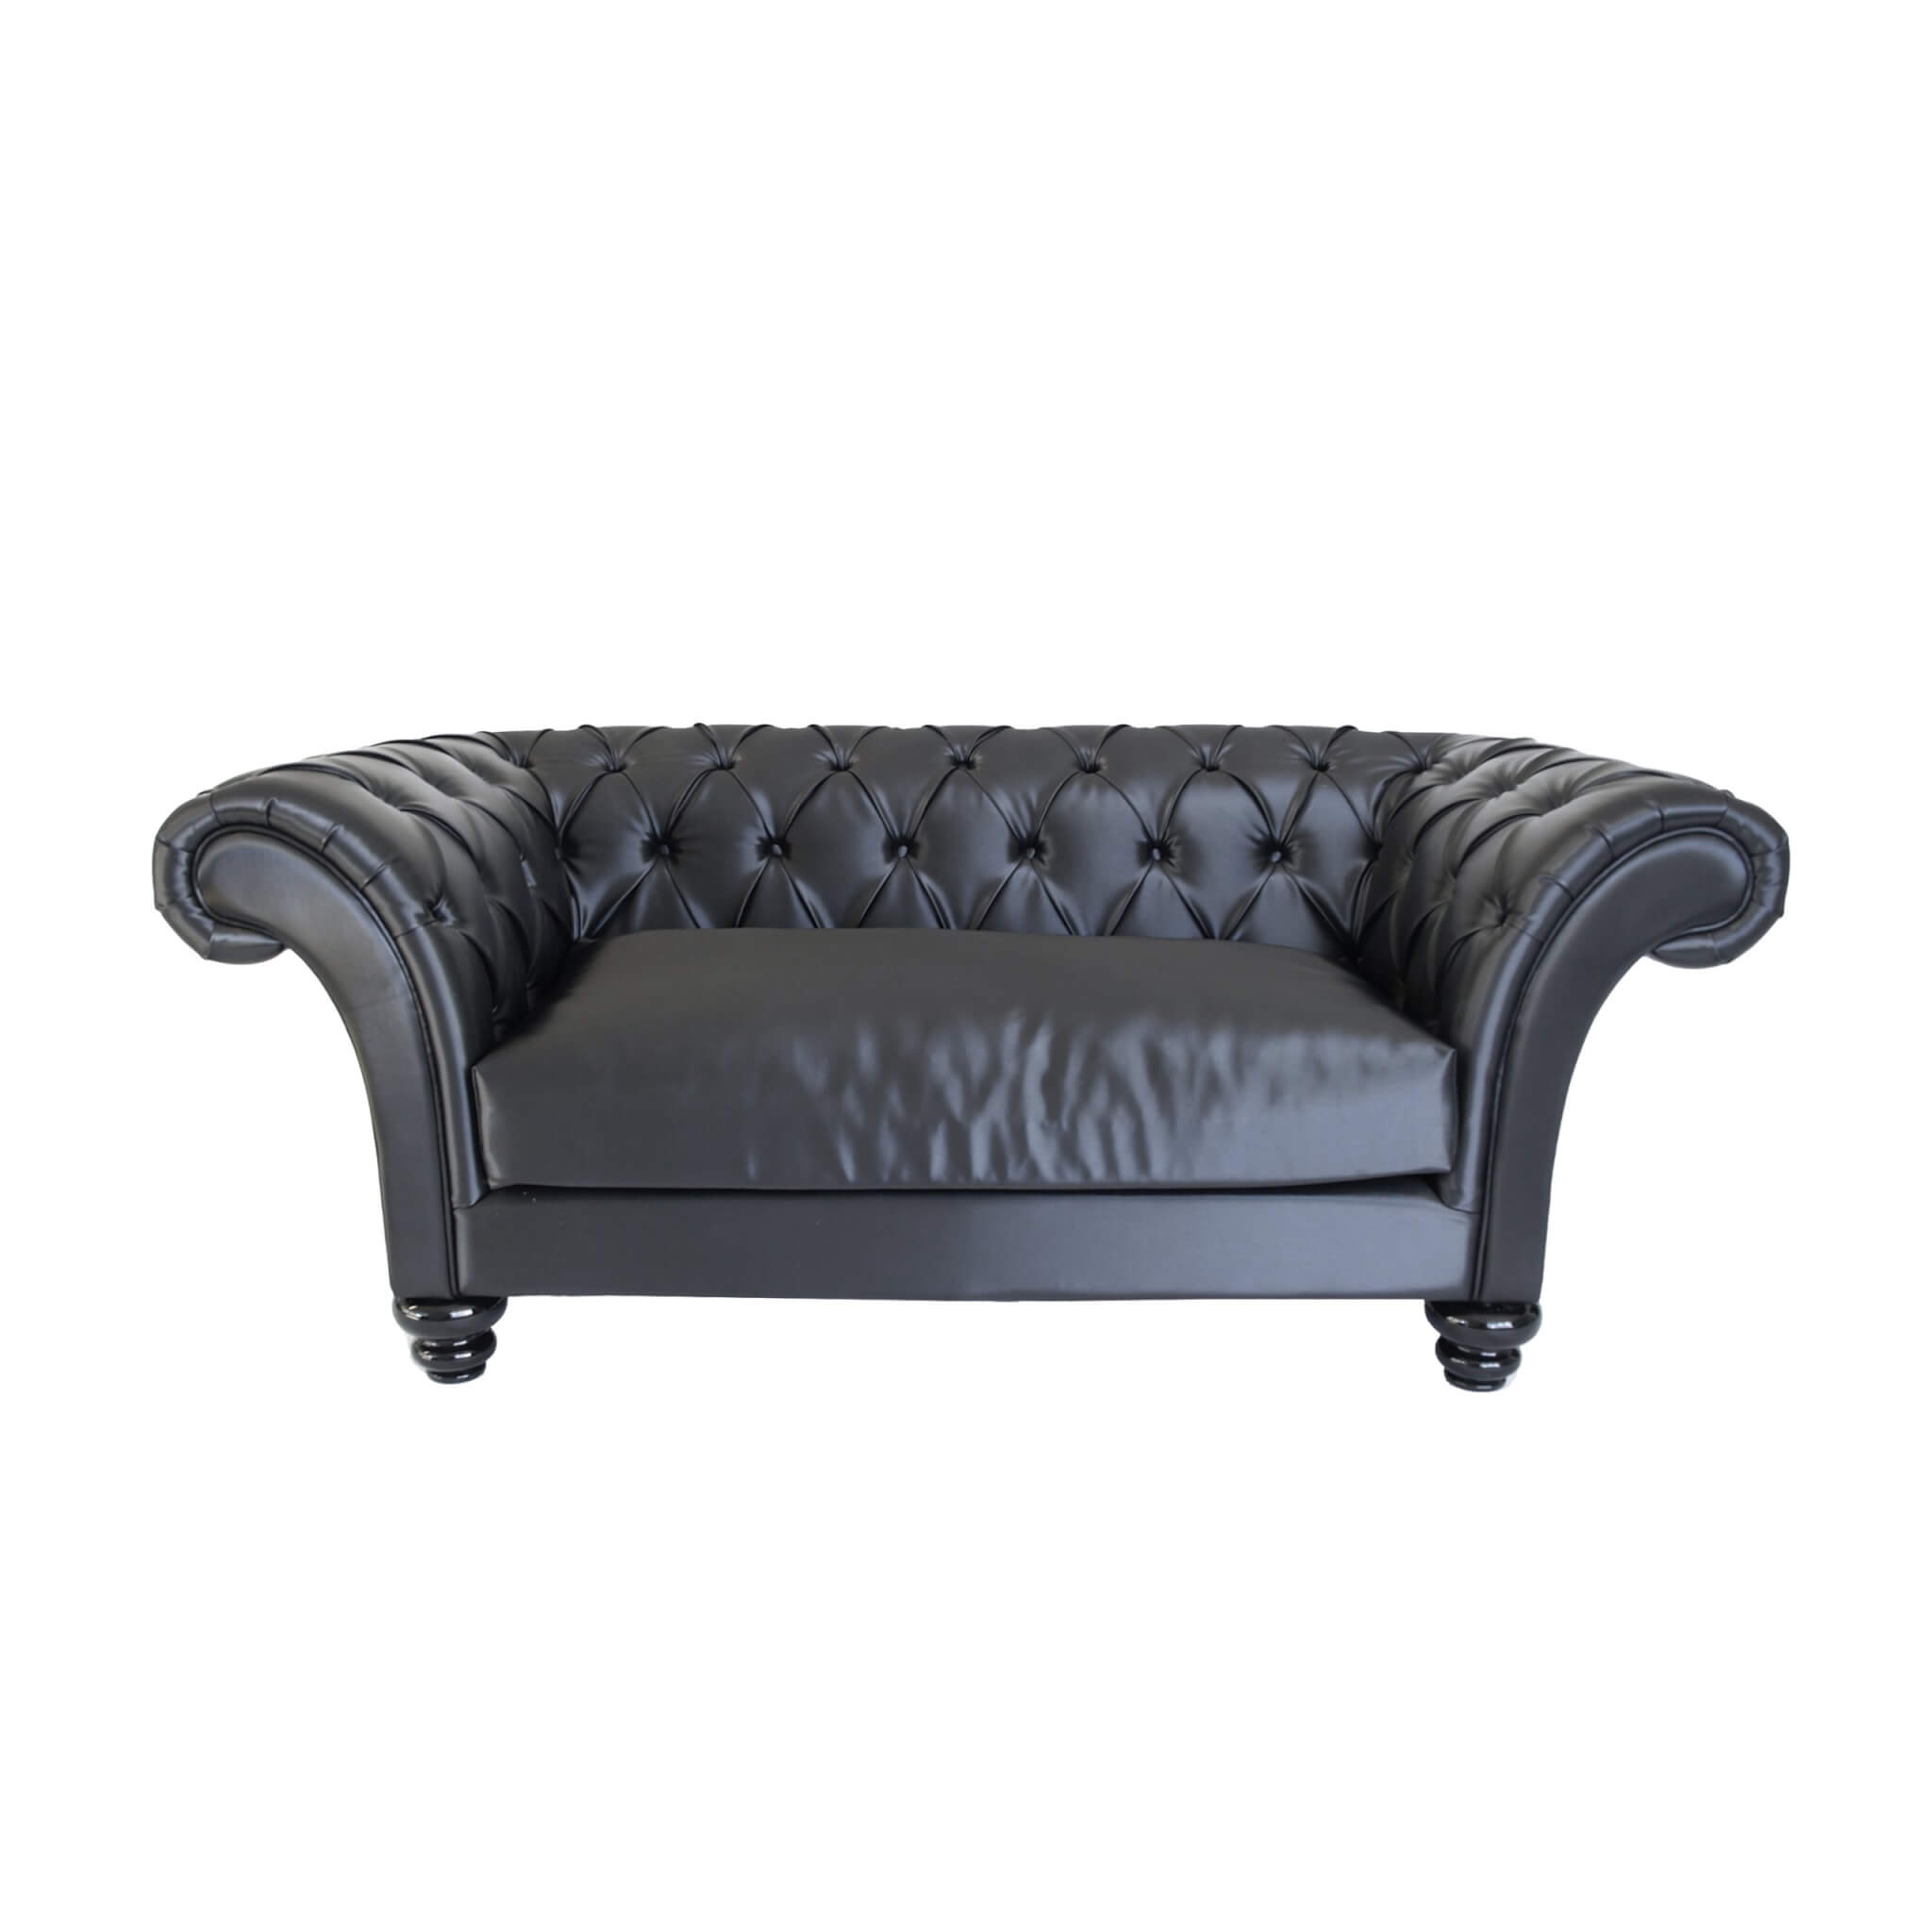 Versailles Two Seater Lounge – Black – 200cmL x 108cmW x 80cmH